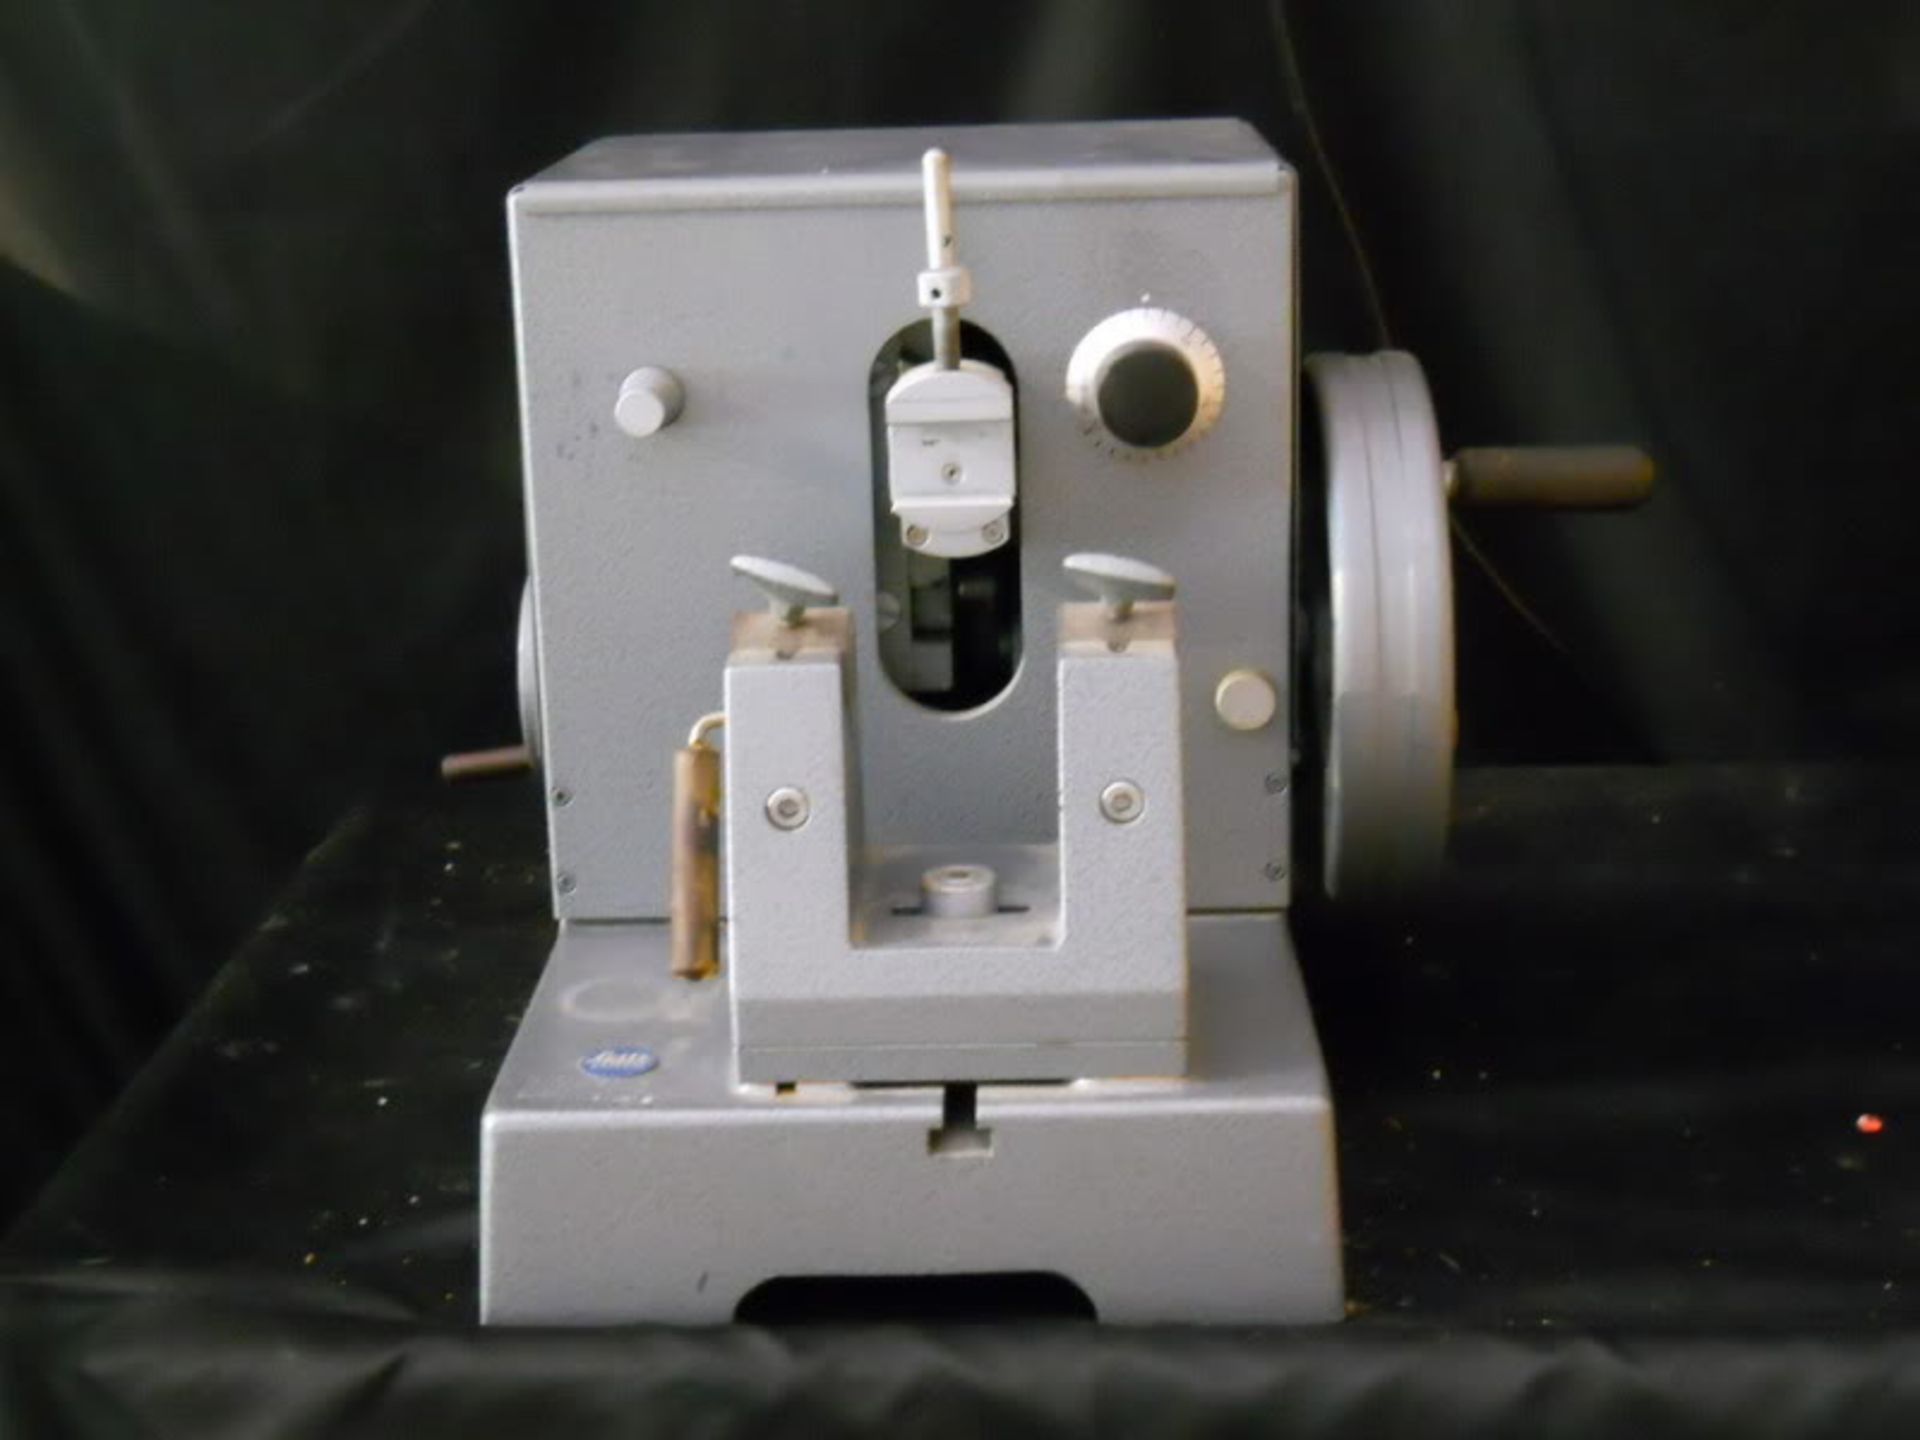 Leitz Wetzler Rotary Microtome Model 1212, Qty 1, 320935862239